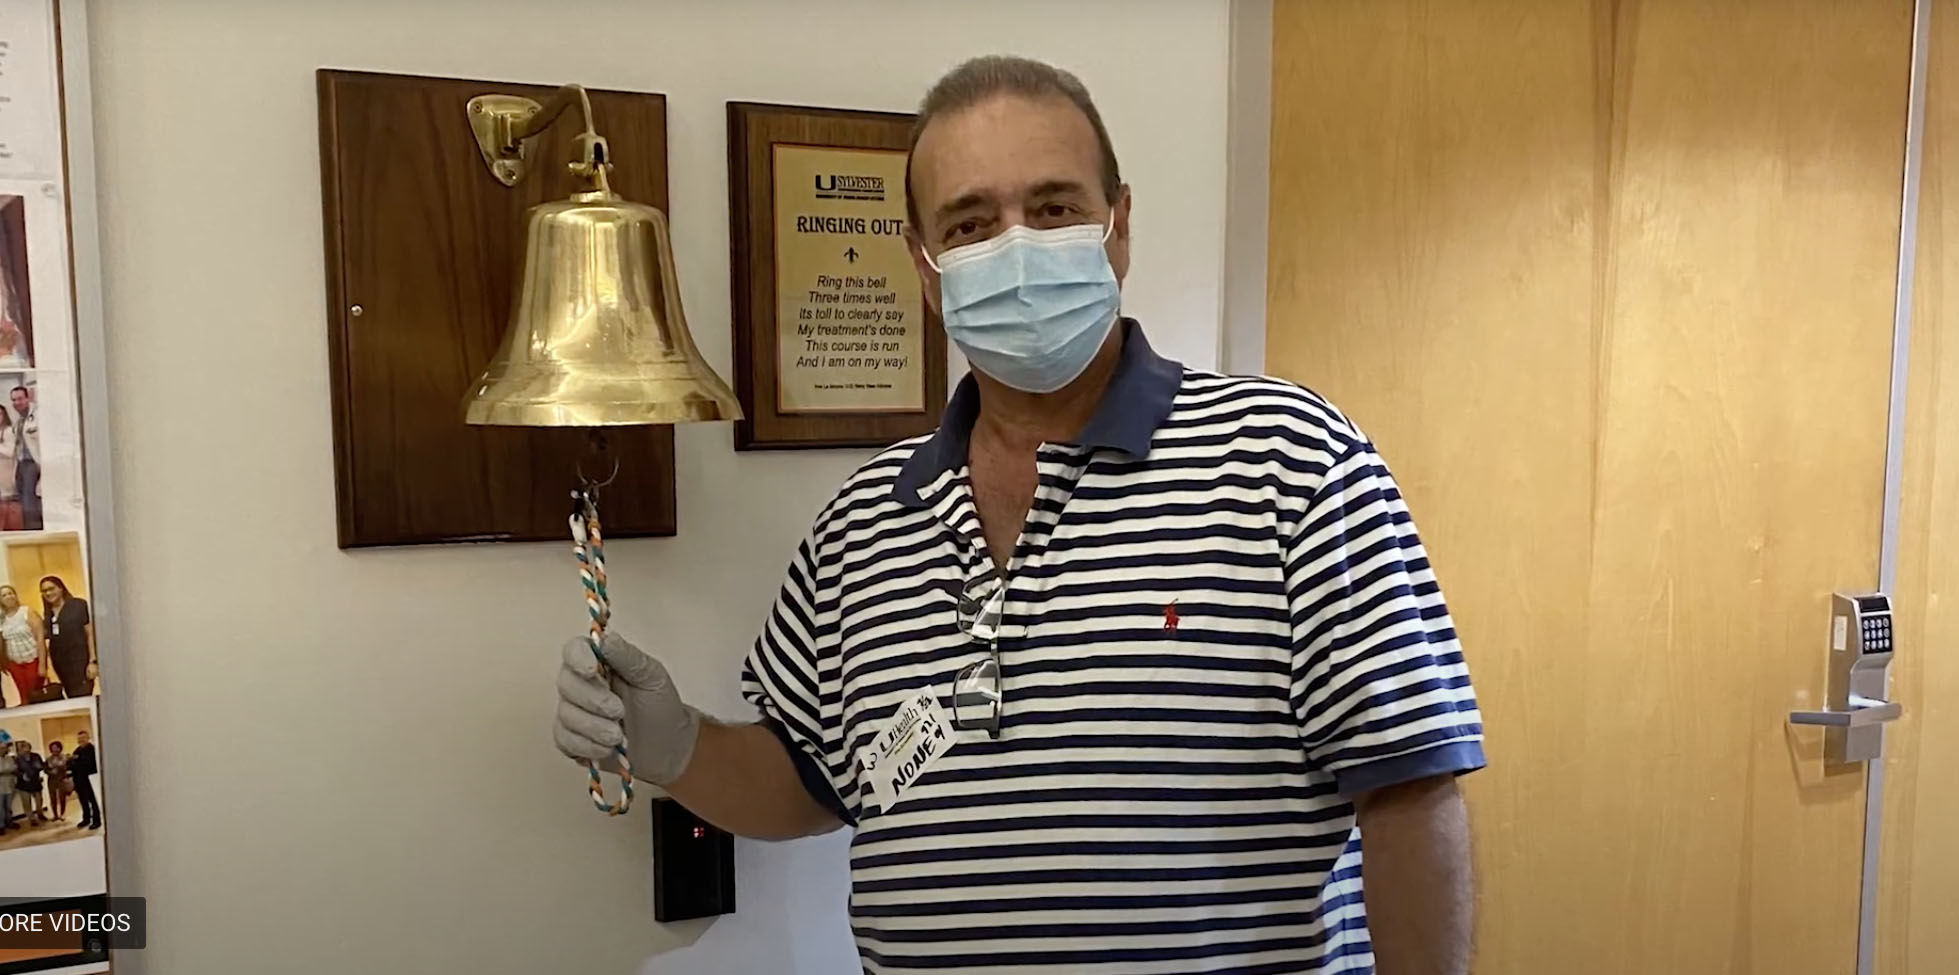 Cancer patient Roger Rodríguez rings the bell for his final chemo treatment.